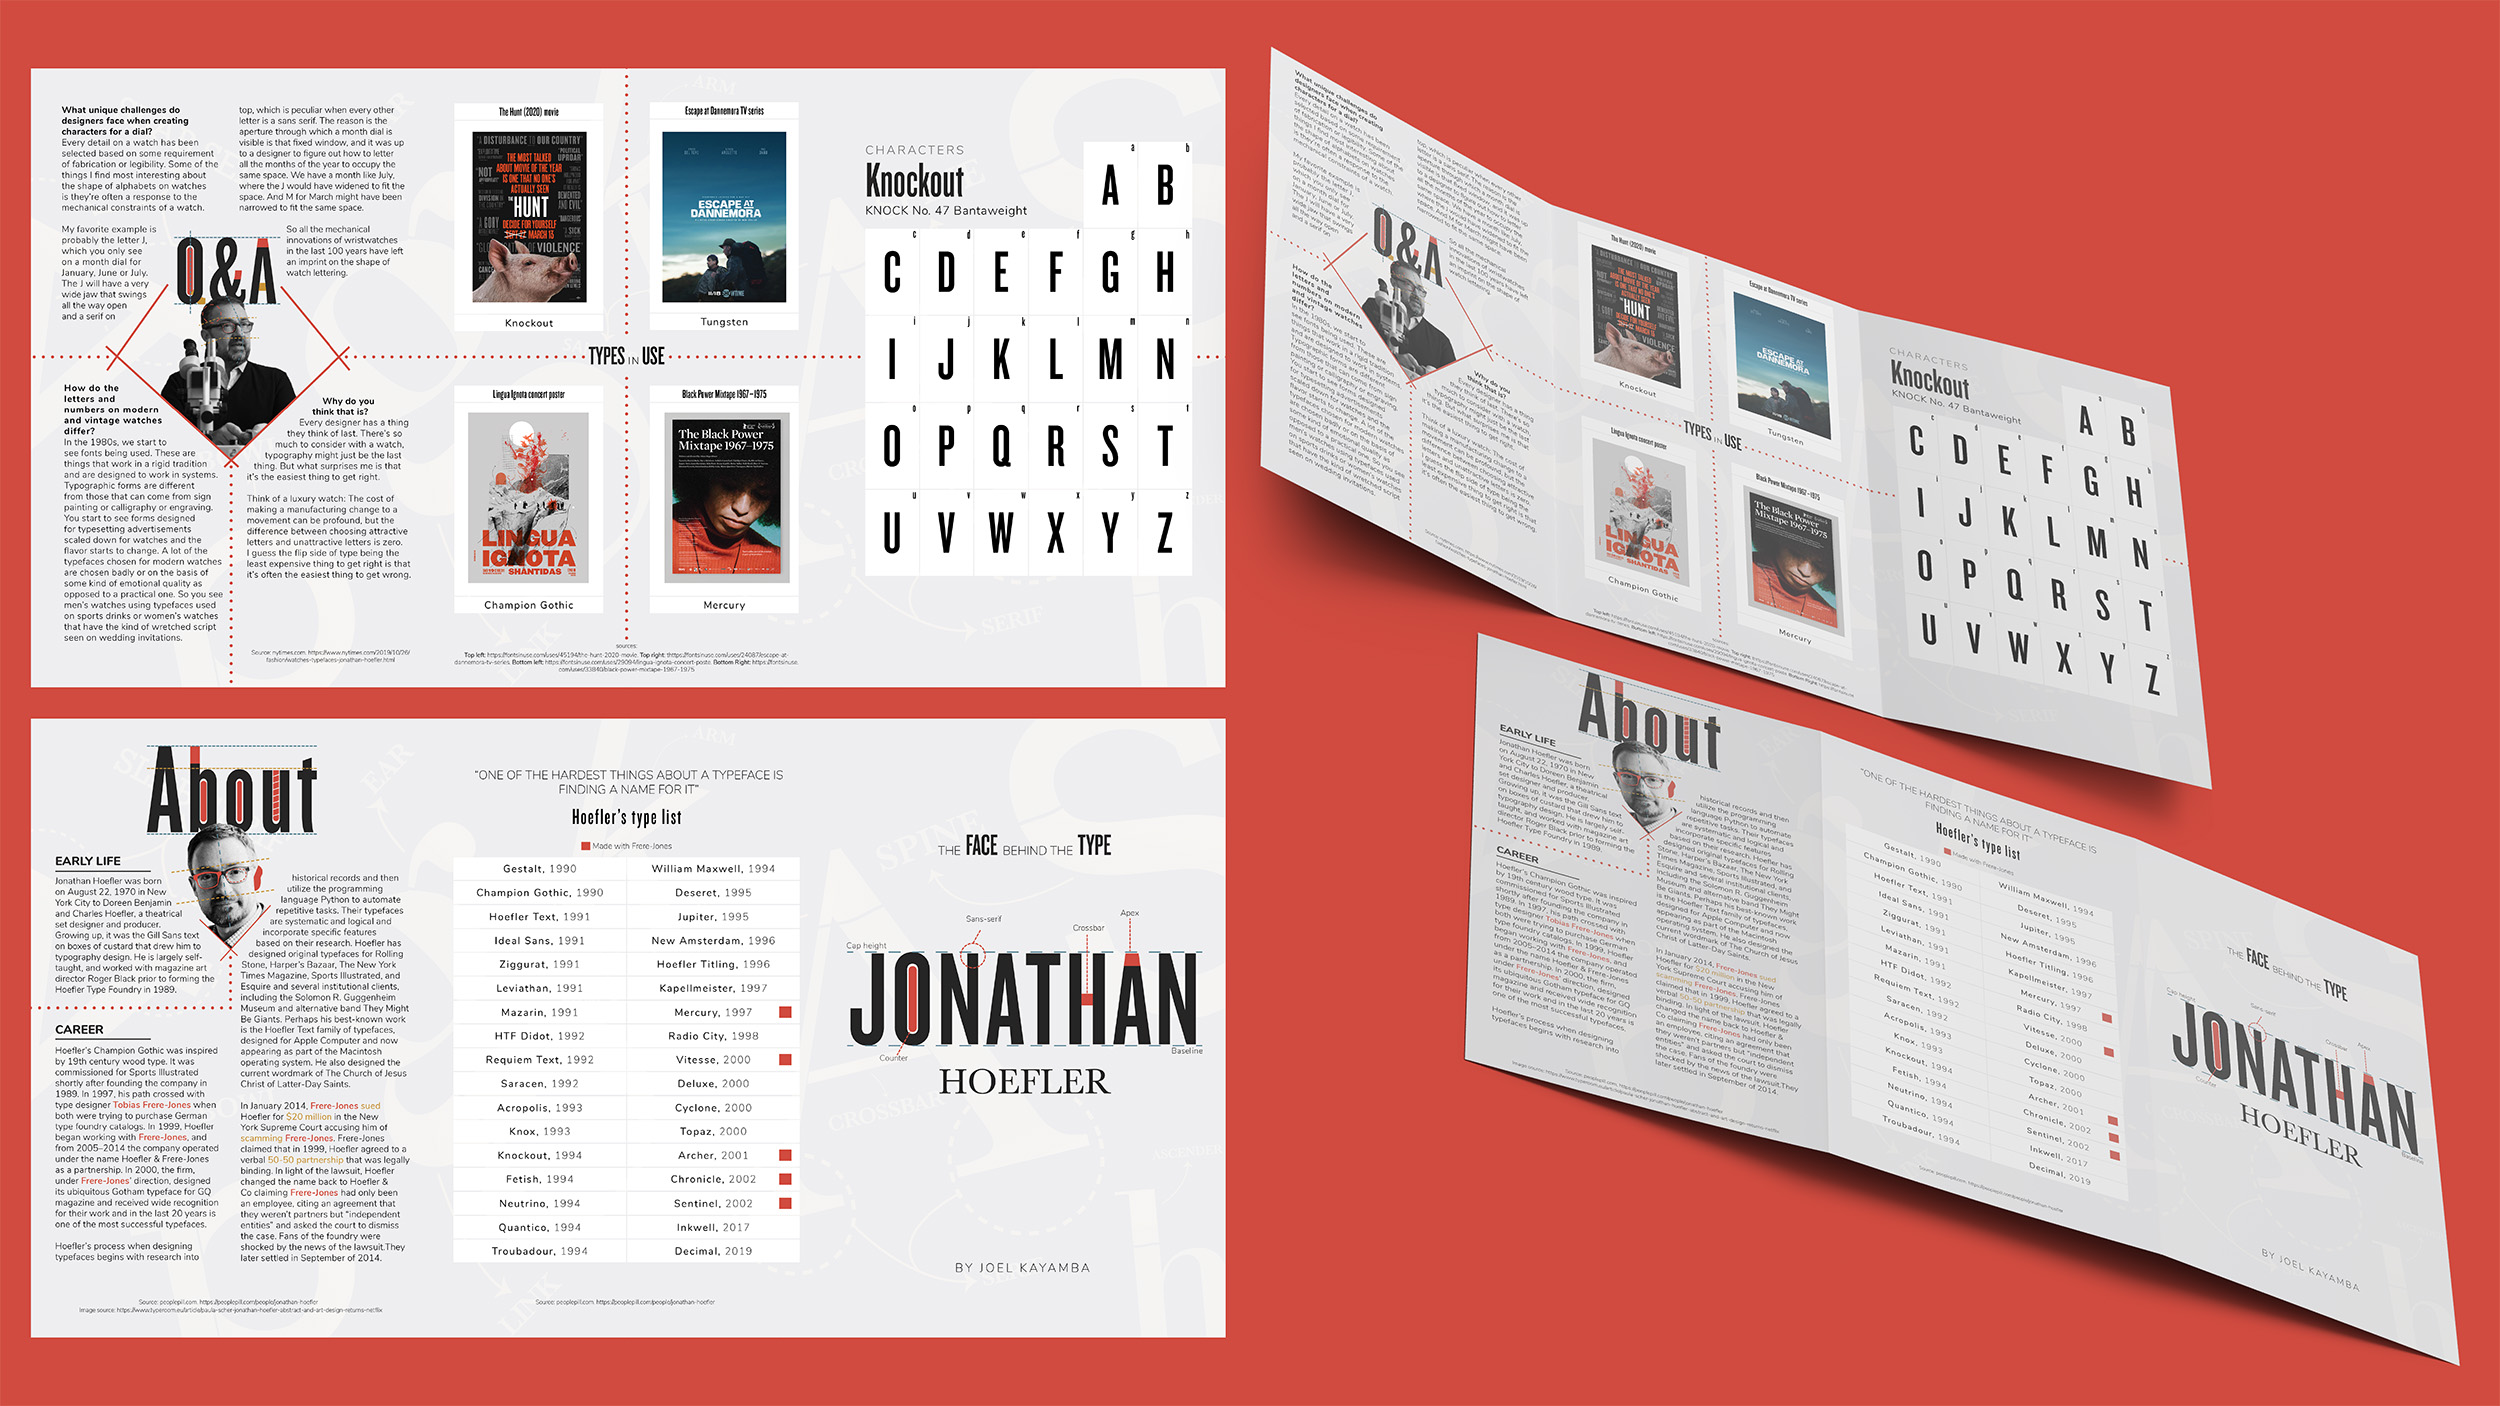 "The Face Behind The Type: Jonathan Hoefler," brochure / "The Face Behind The Type: Jonathan Hoefler," brochure, 16.5 x 8.5 inches, 2022. A trifold publication. The goal was to have an interactive layout with a minimal design. I also included some typographic terms that I have learned.